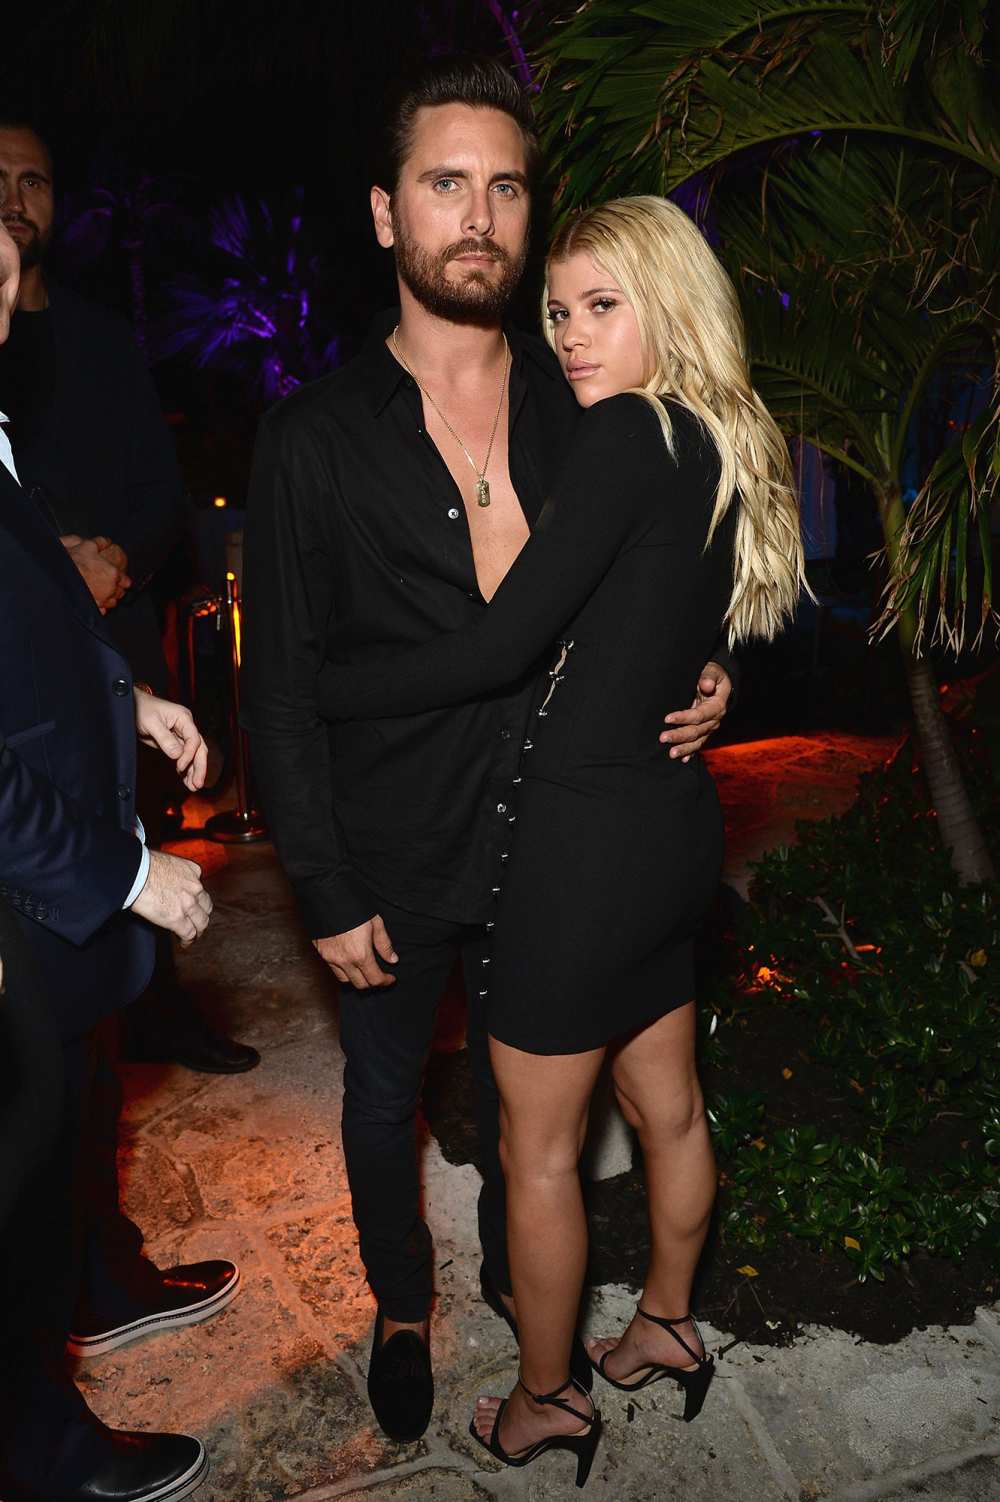 Sofia Richie Likes Her 'Little Private Life' With BF Scott Disick